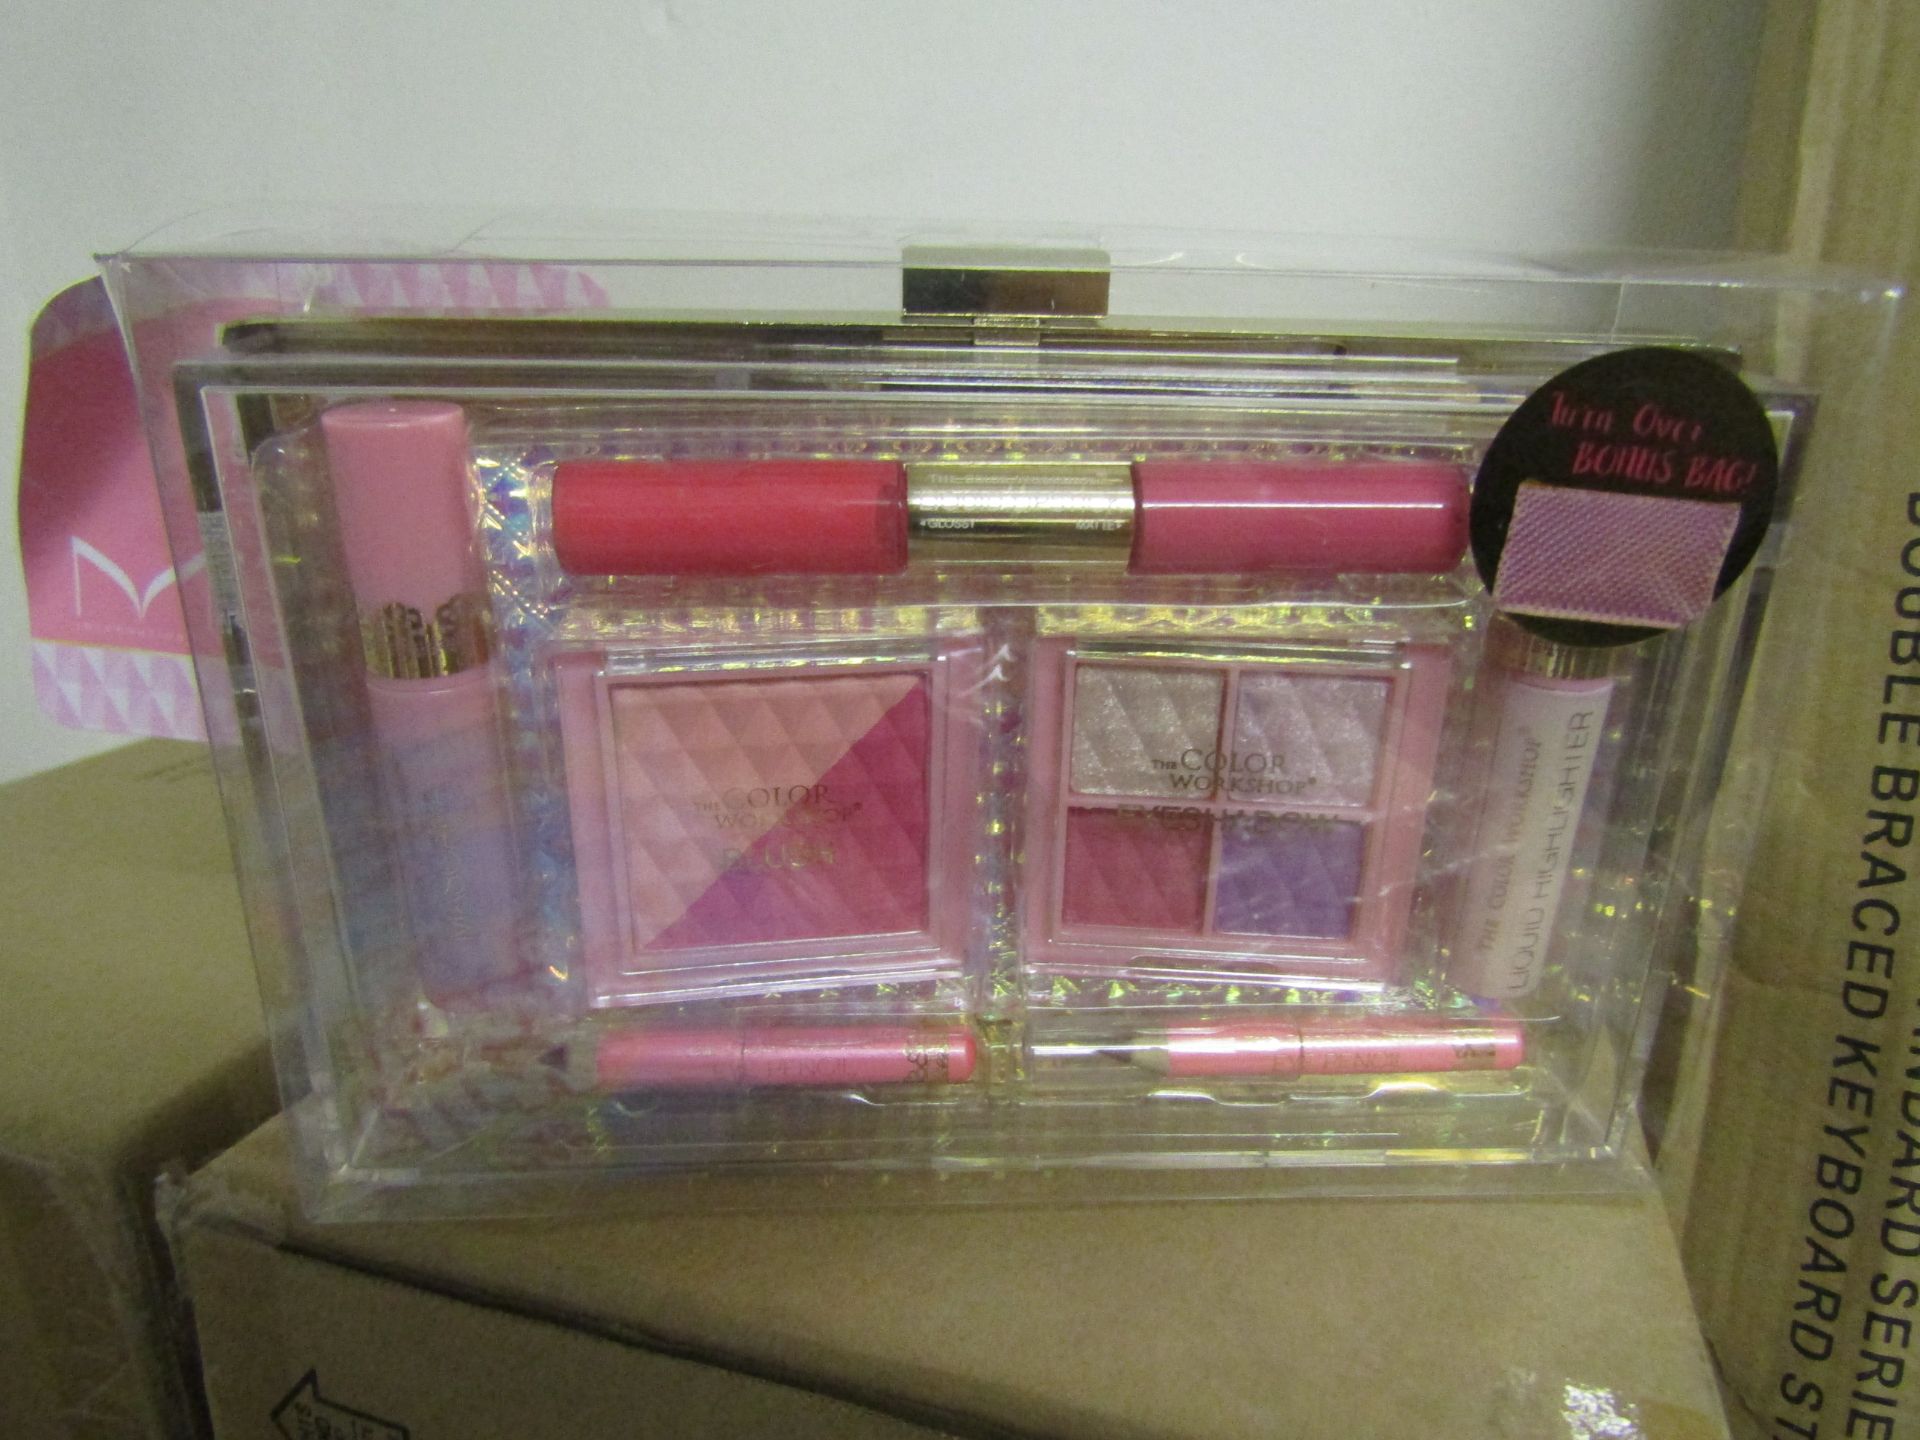 12x The Colour Workshop - Sweetheart 14-Piece Beauty Set With Clutch Bag - New & Packaged.